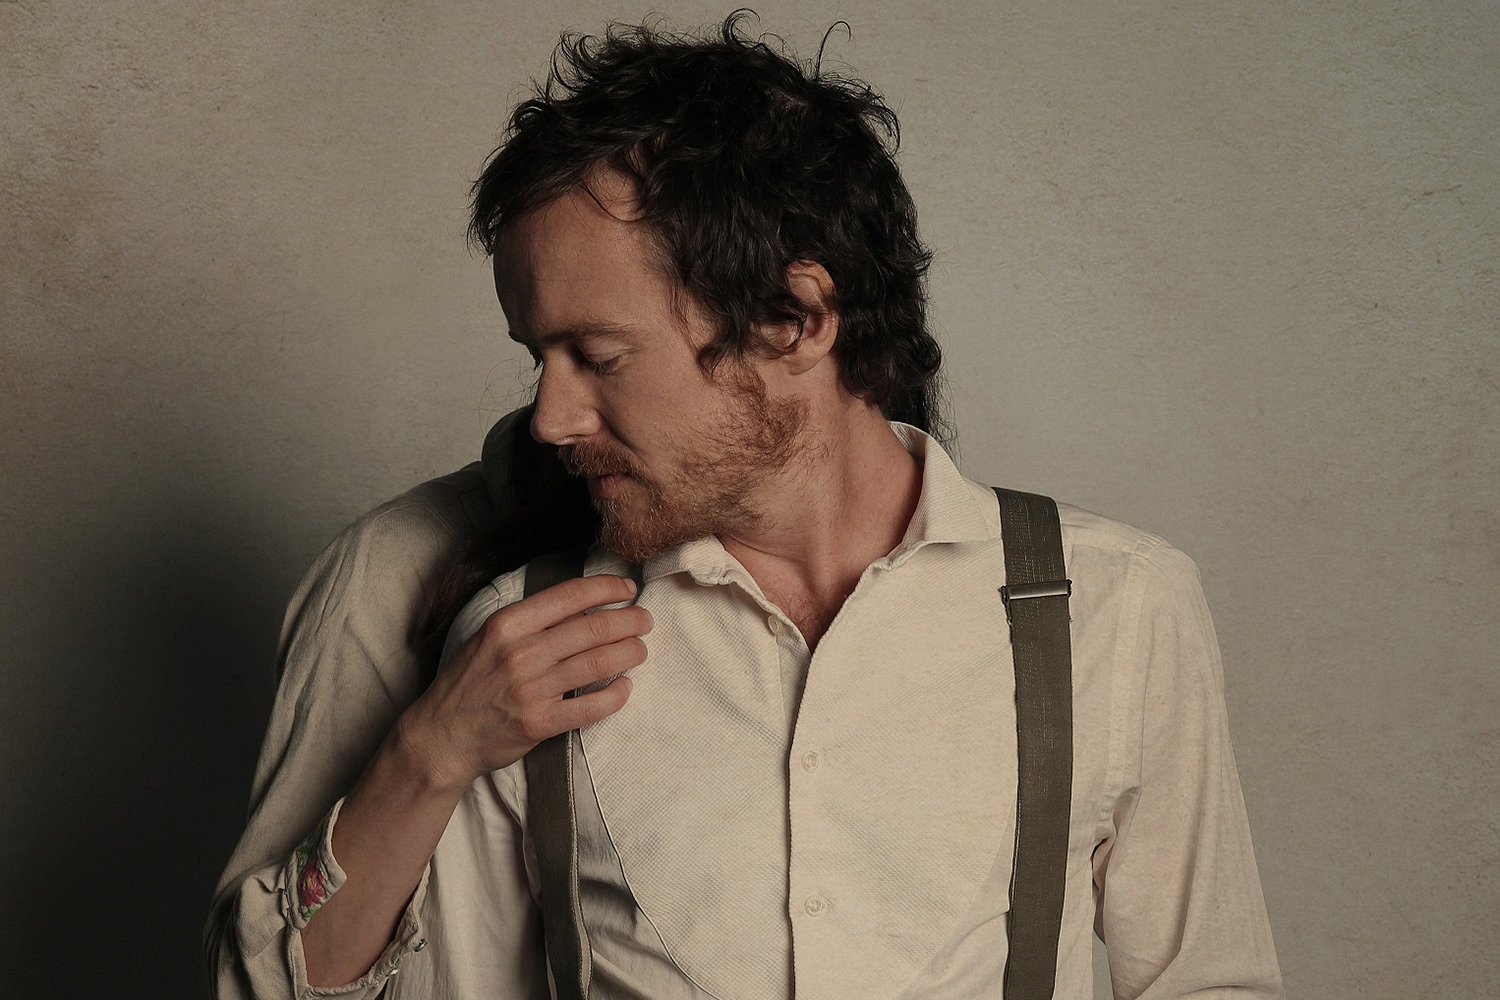 Damien Rice announces first new album in eight years ‘My Favourite Faded Fantasy’